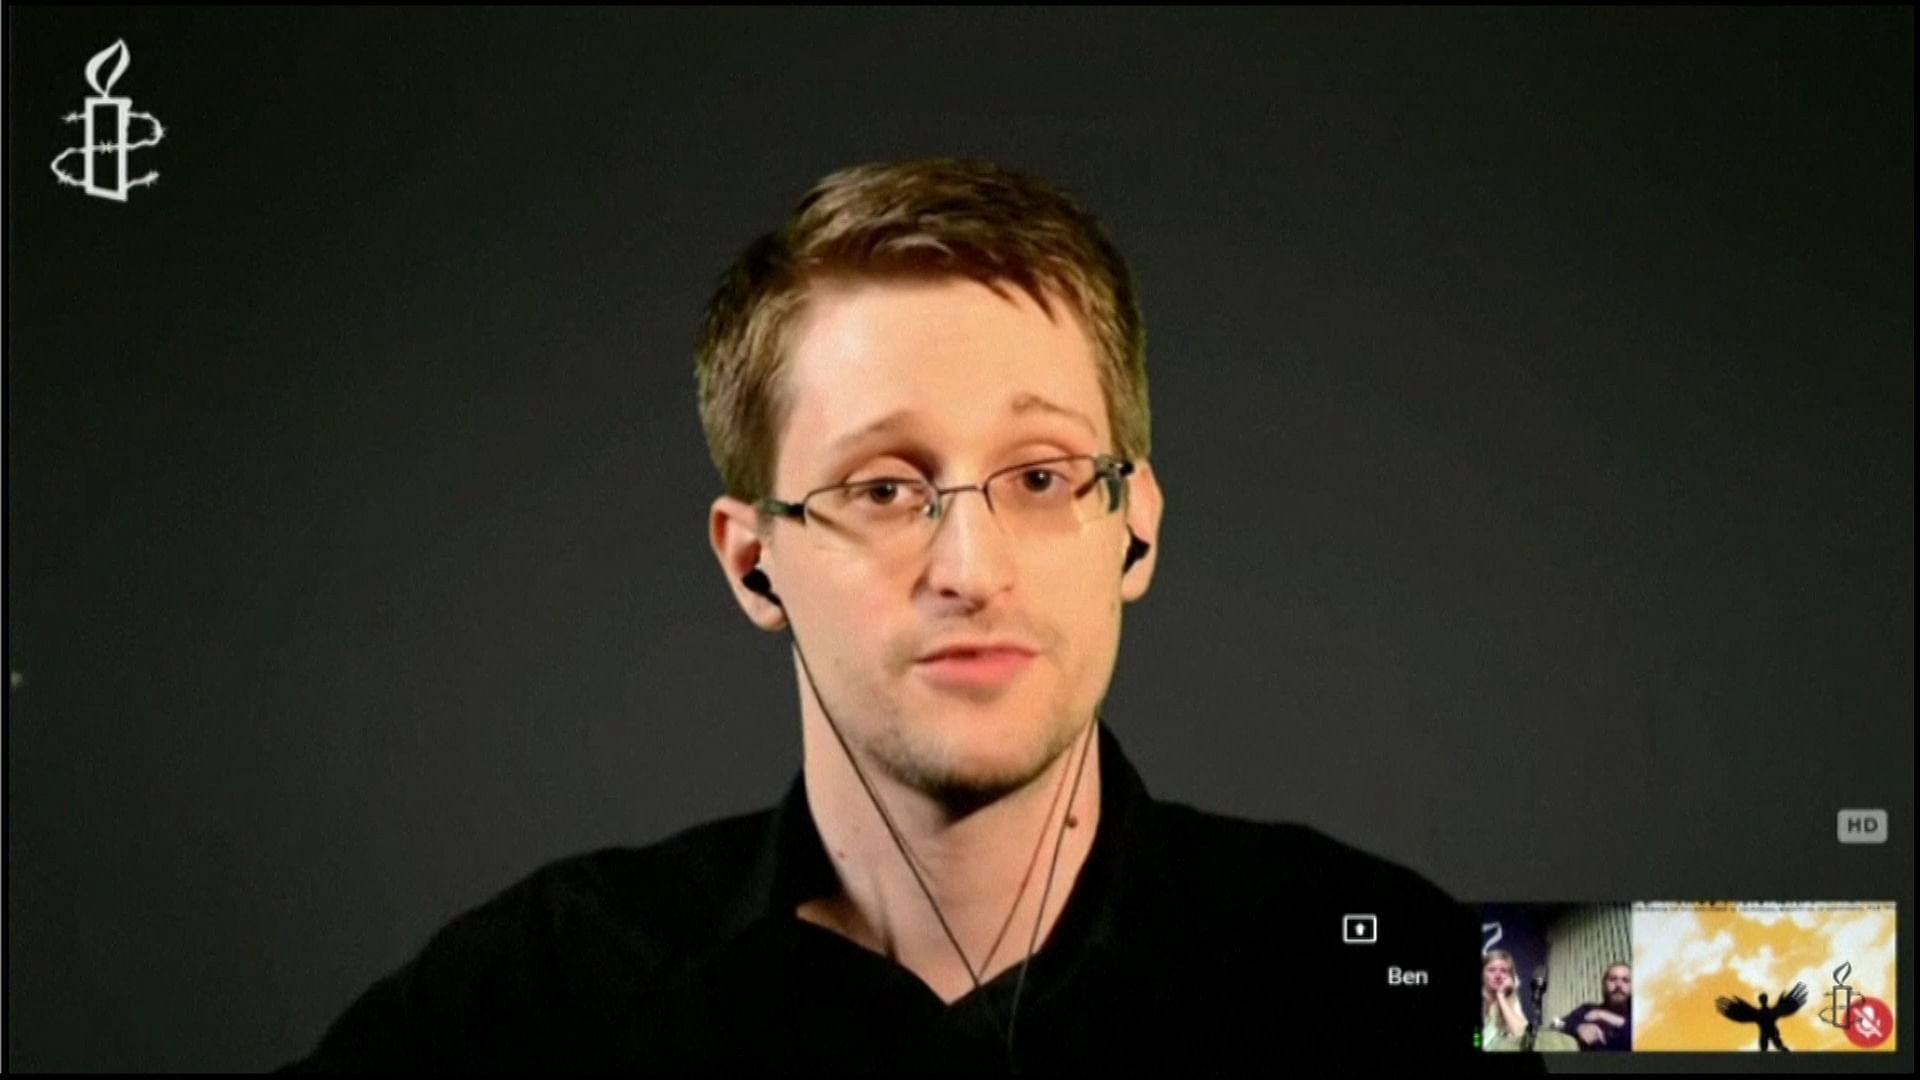 File photo of Edward Snowden, used for representational purposes.